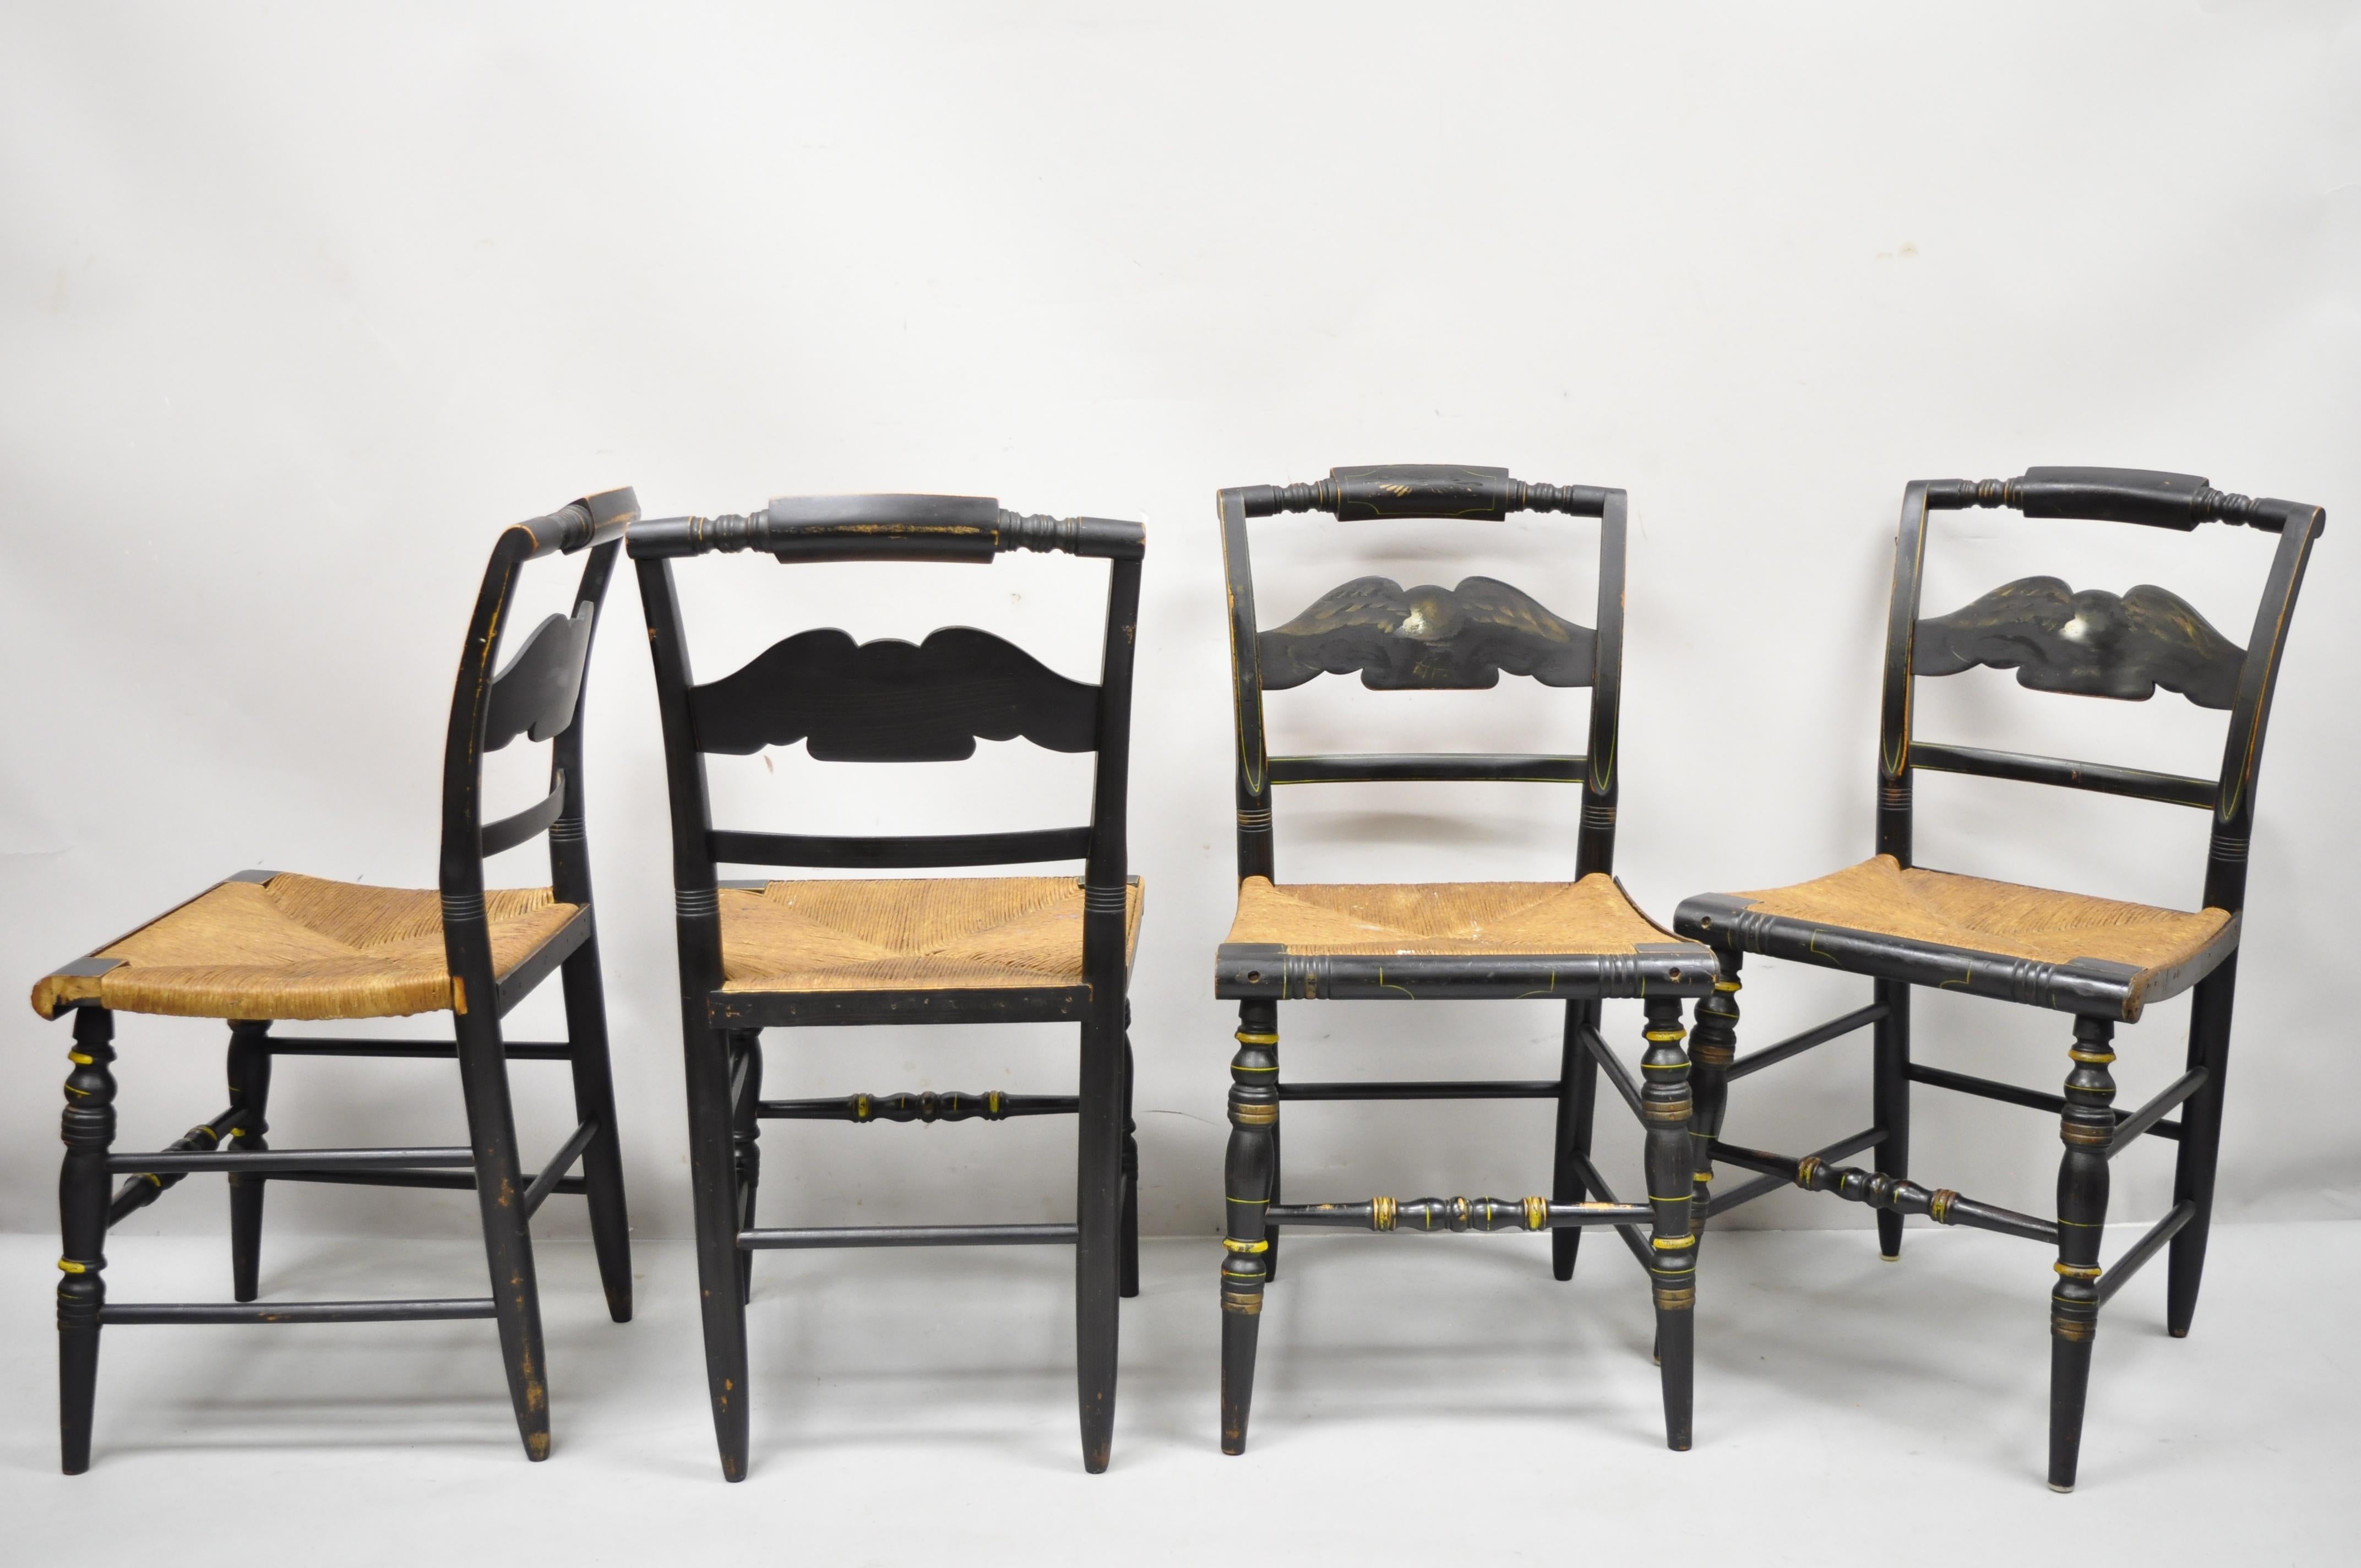 19th century American Colonial L. Hitchcock black stenciled rush seat dining chairs - Set of 4. Item features woven rush seat, eagle stencil painted backs, solid wood construction, original signature, very nice antique set, quality American